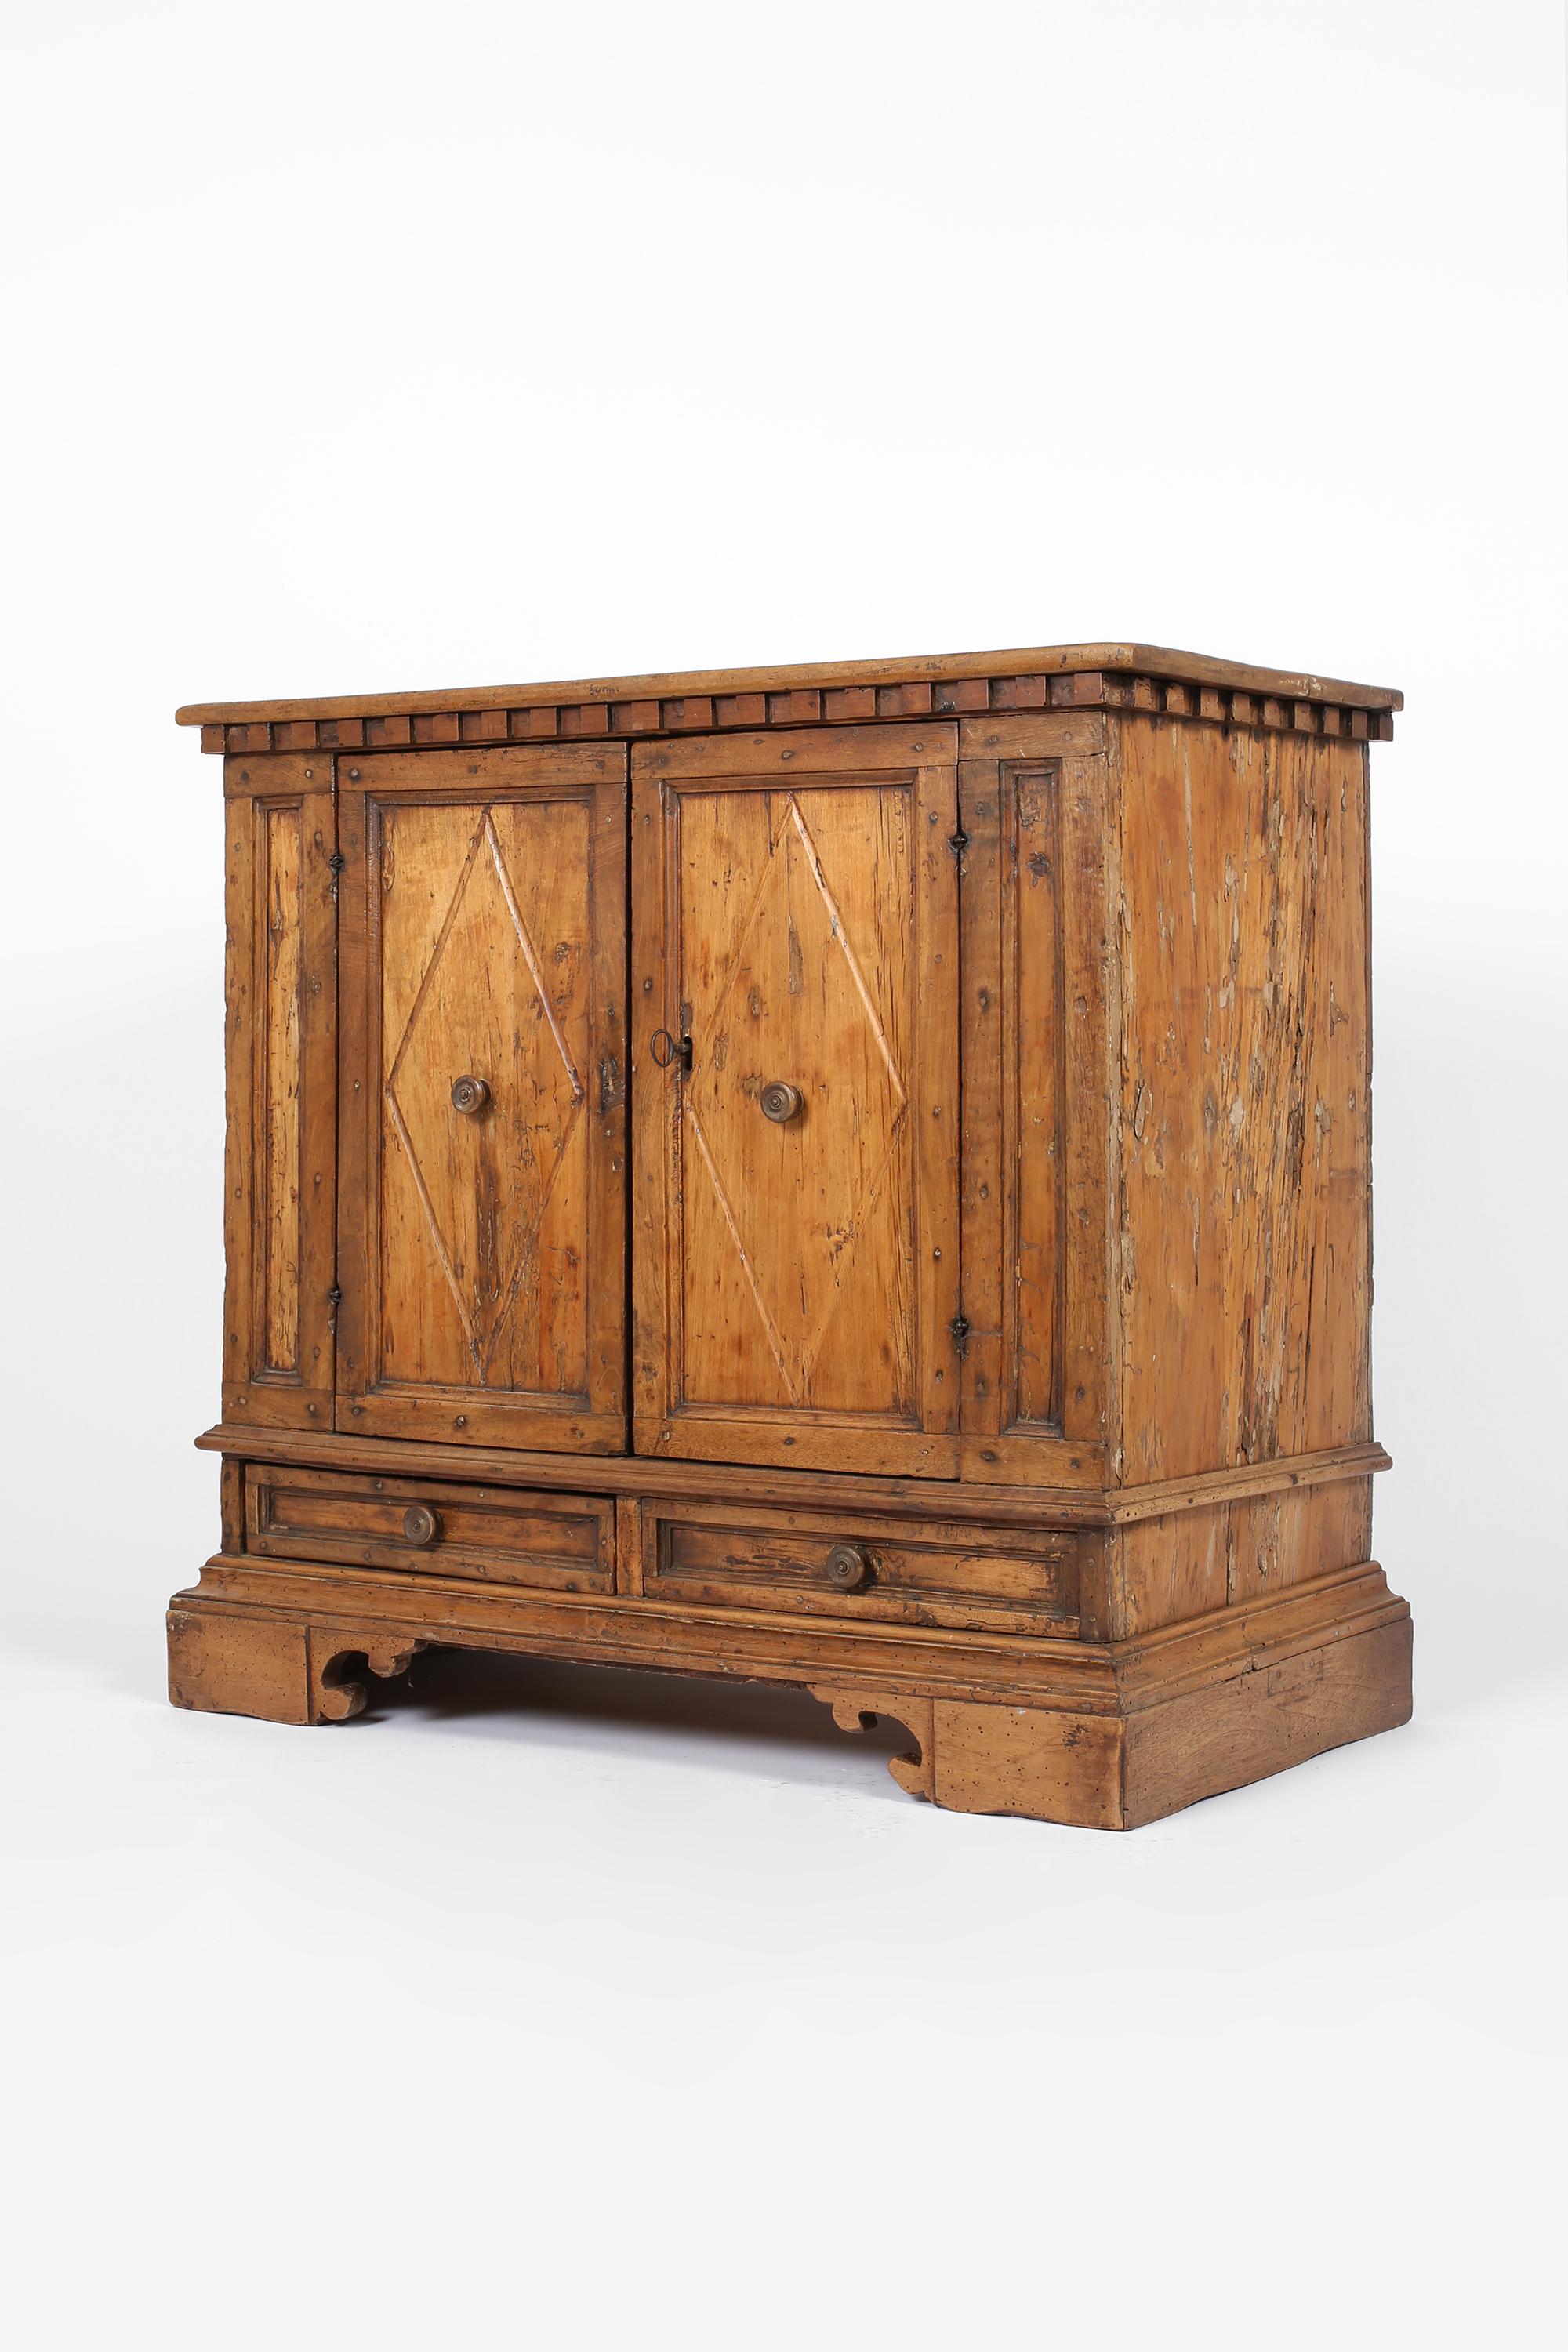 A 17th century heavily patinated walnut cabinet/credenza from Florence. Featuring a typical crenellated frieze and decorative moulding/fretwork - the two geometric panelled doors open to reveal a single internal shelf with two drawers below. Highly